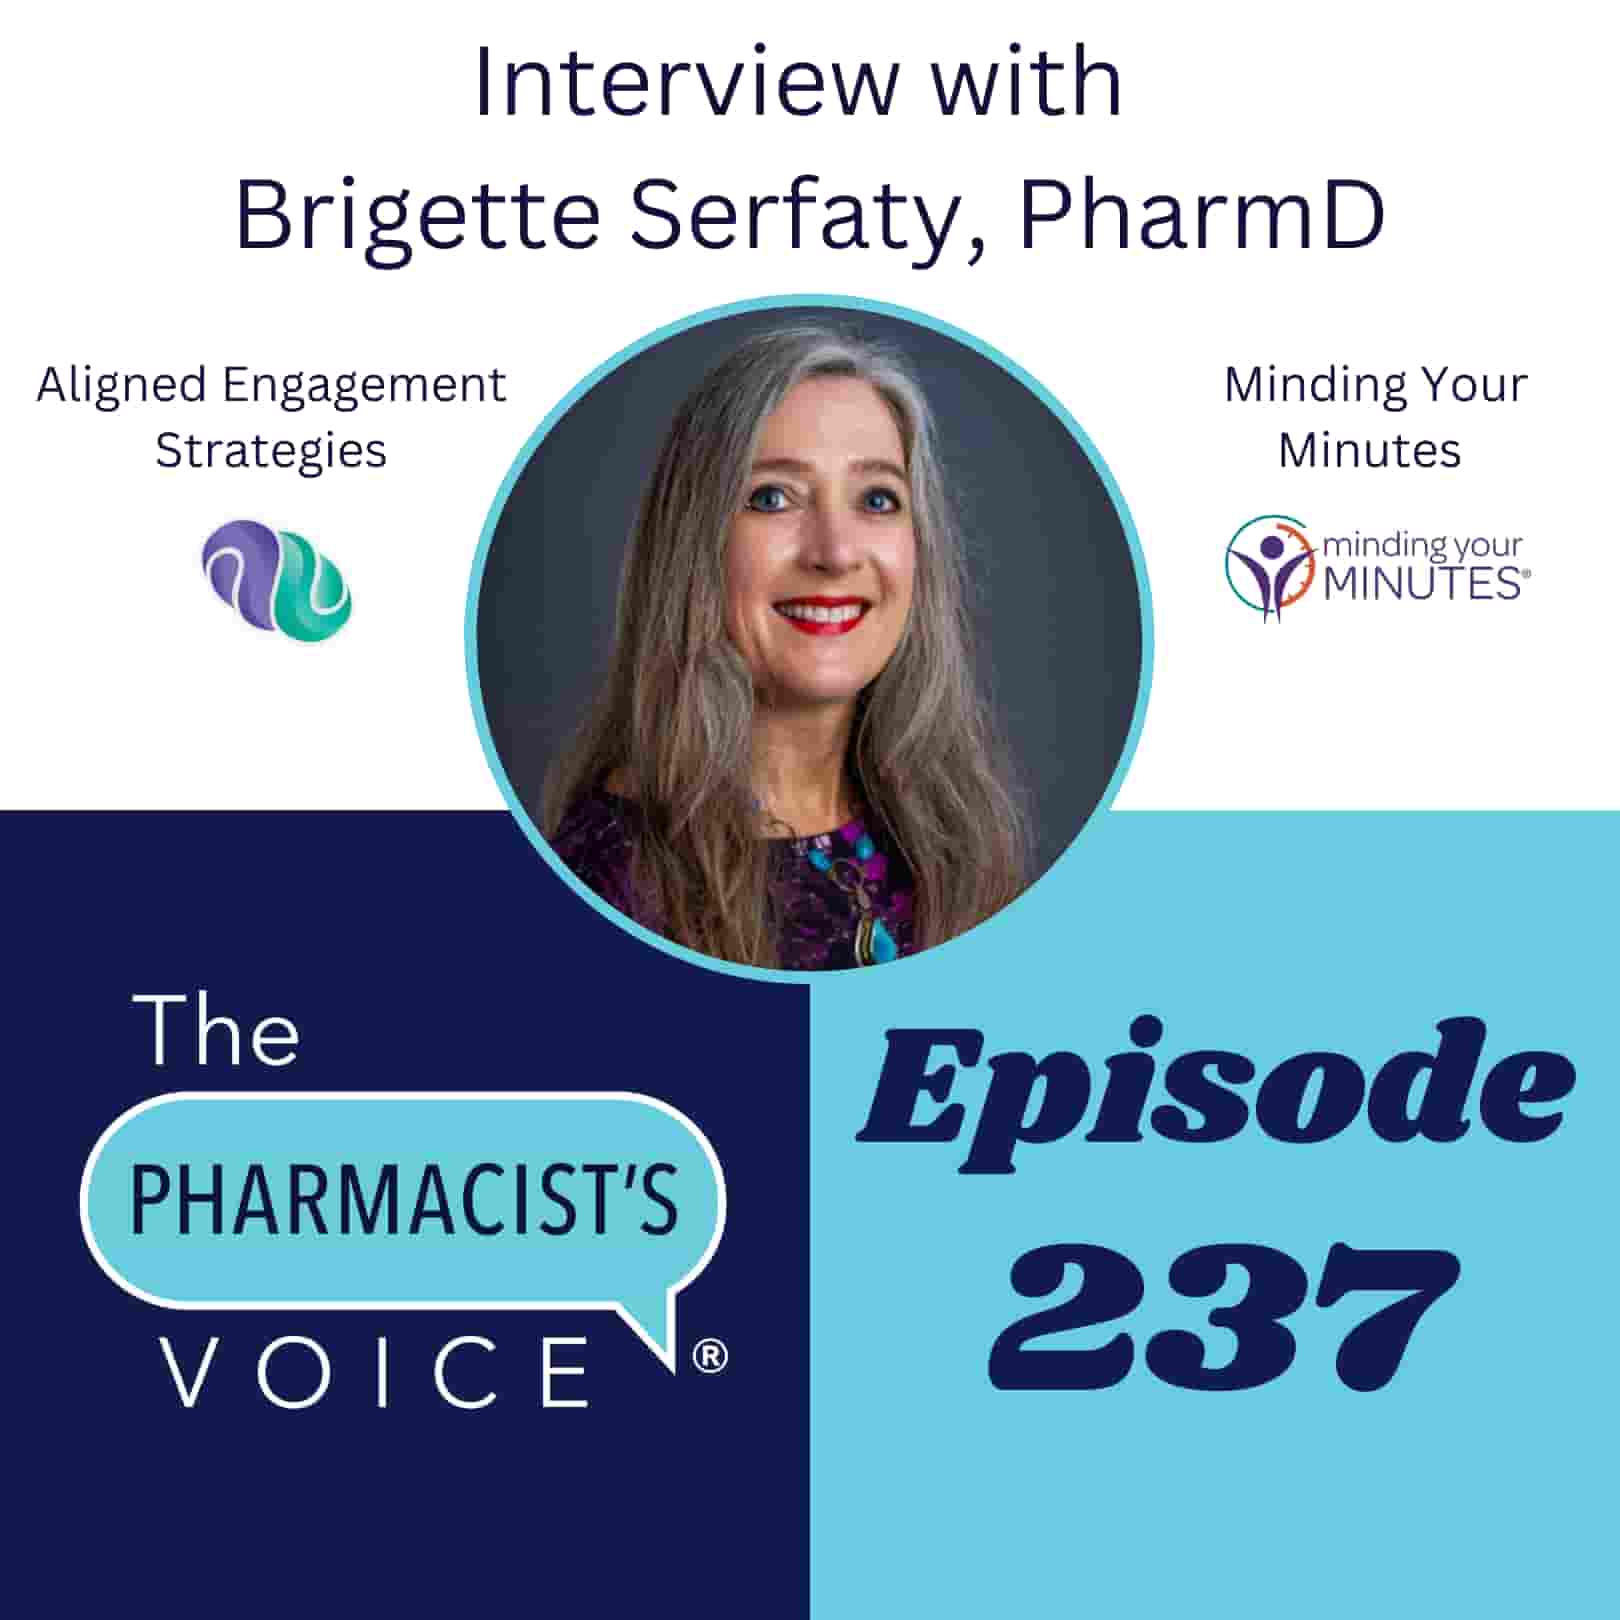 Interview with Brigette Serfaty, PharmD. The Pharmacist's Voice Podcast Episode 237